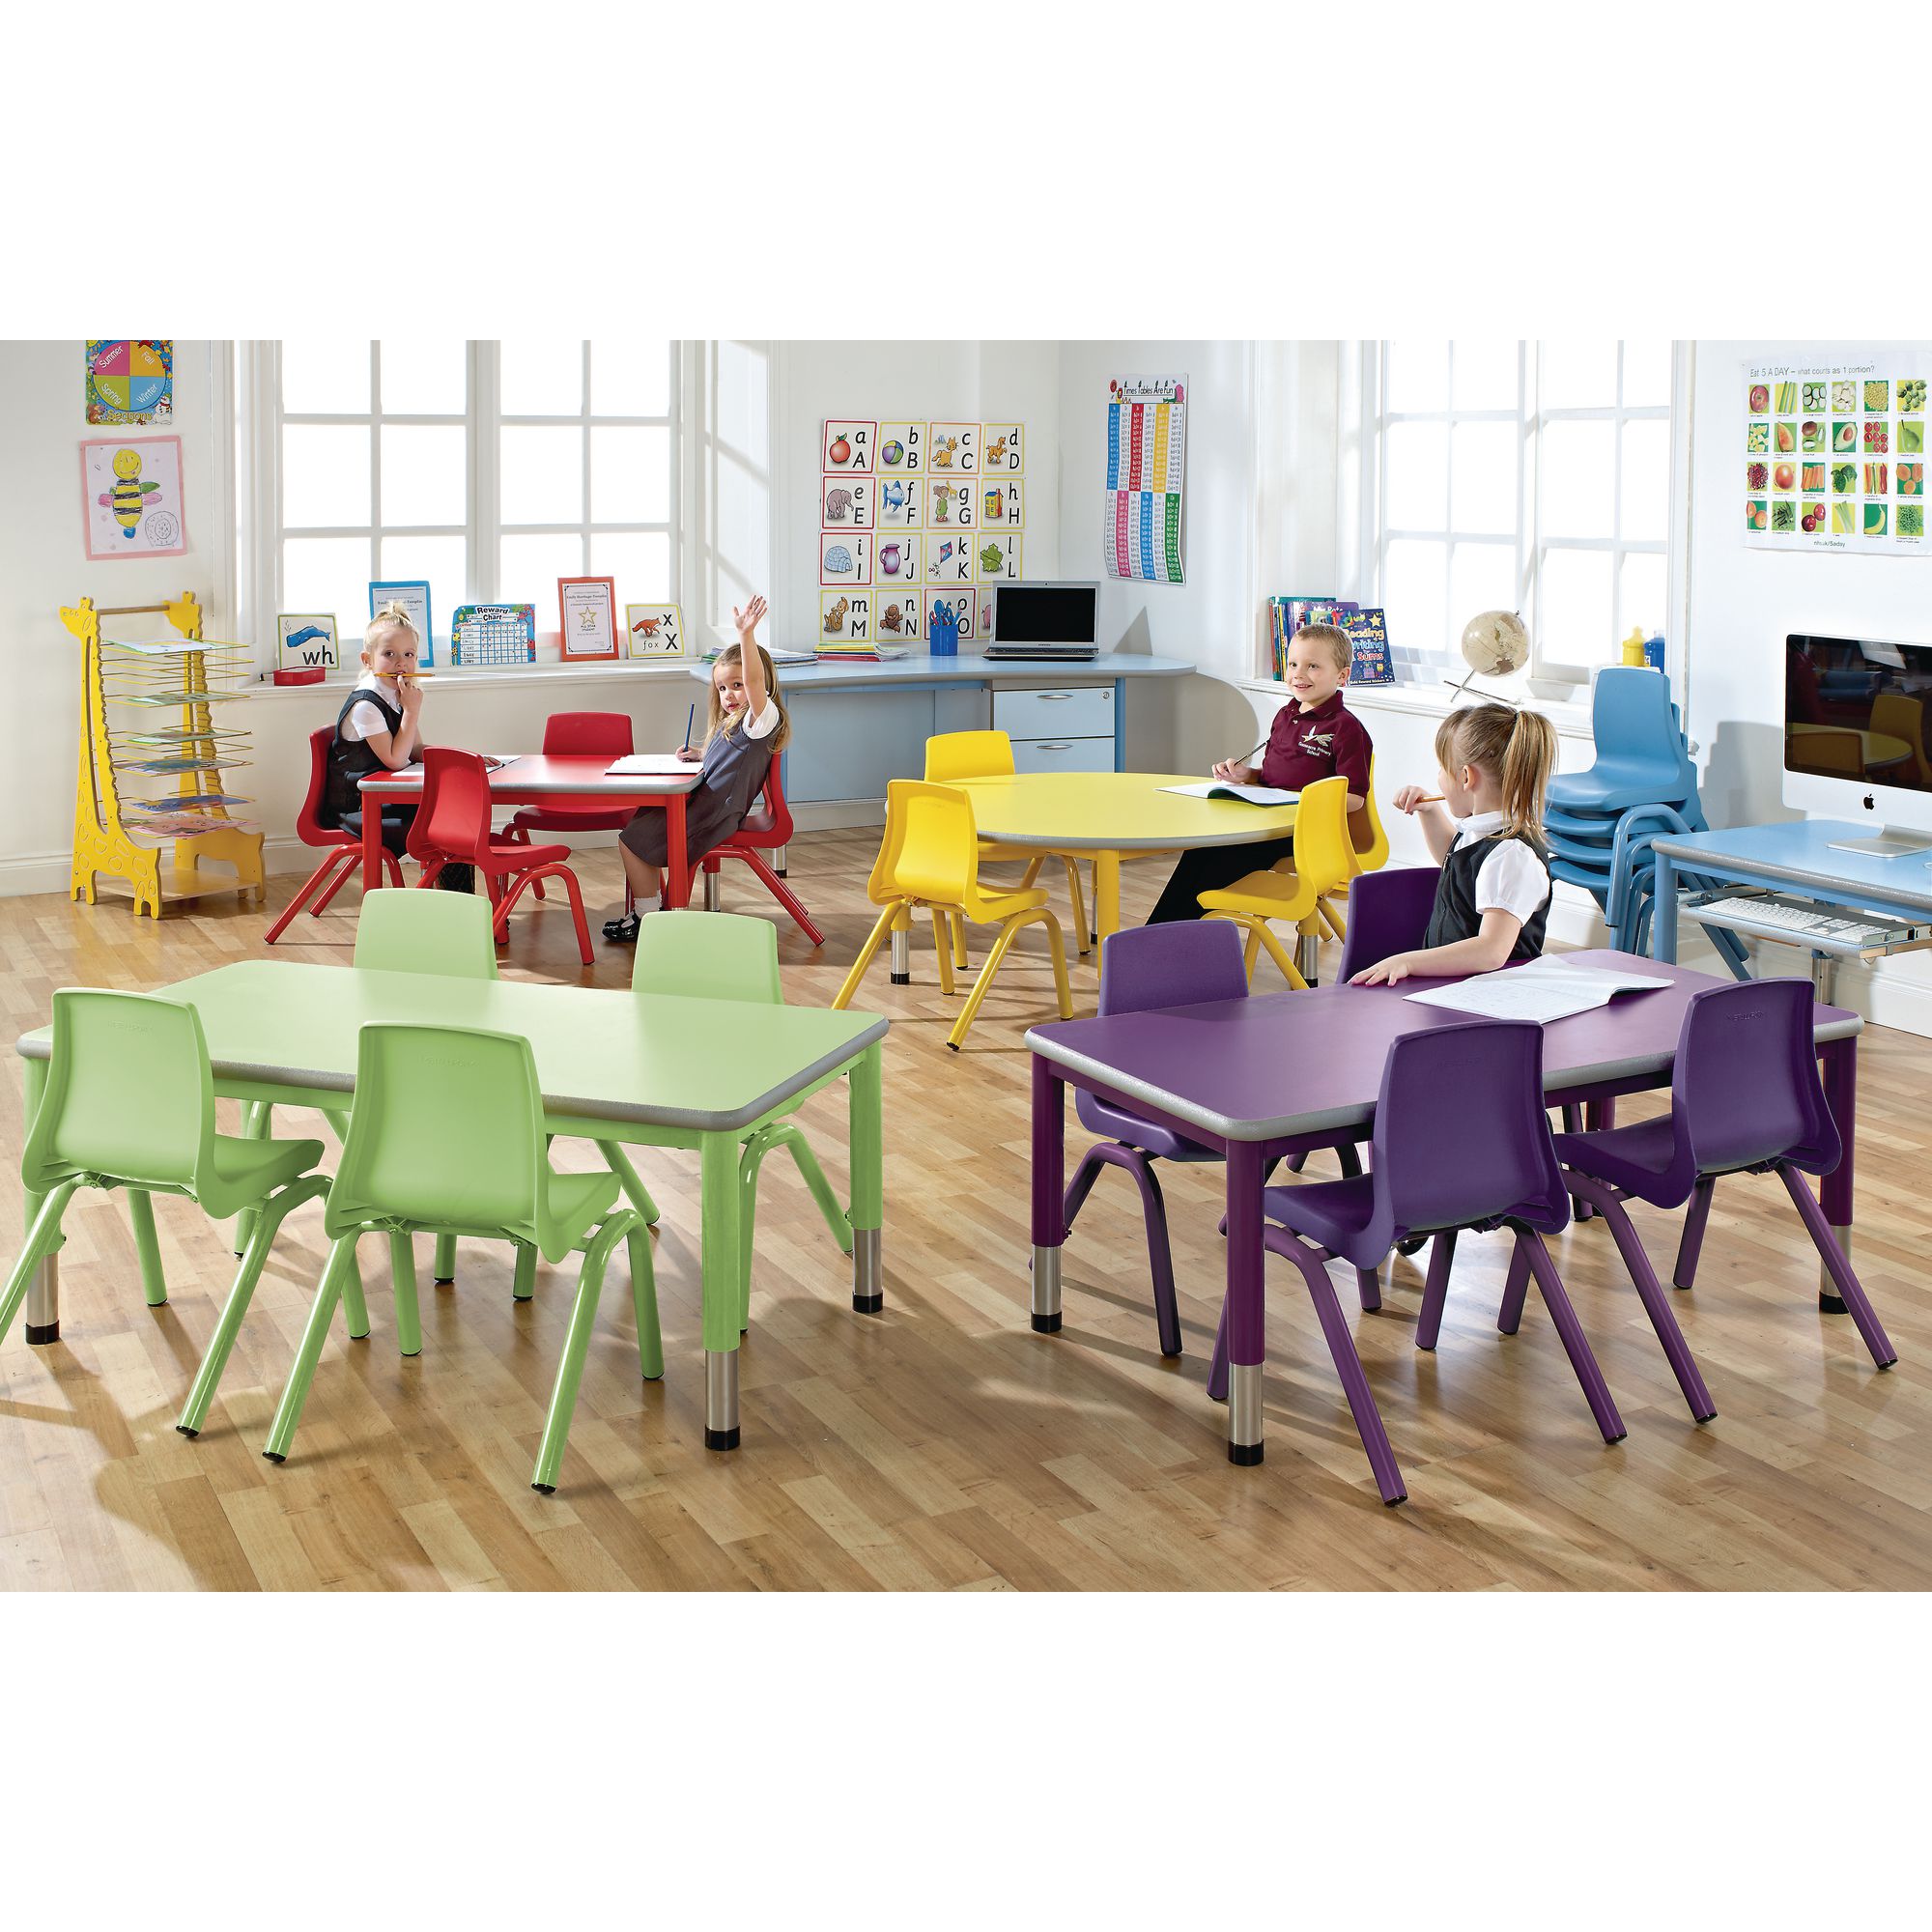 Harlequin Chairs Pre Sch Yel